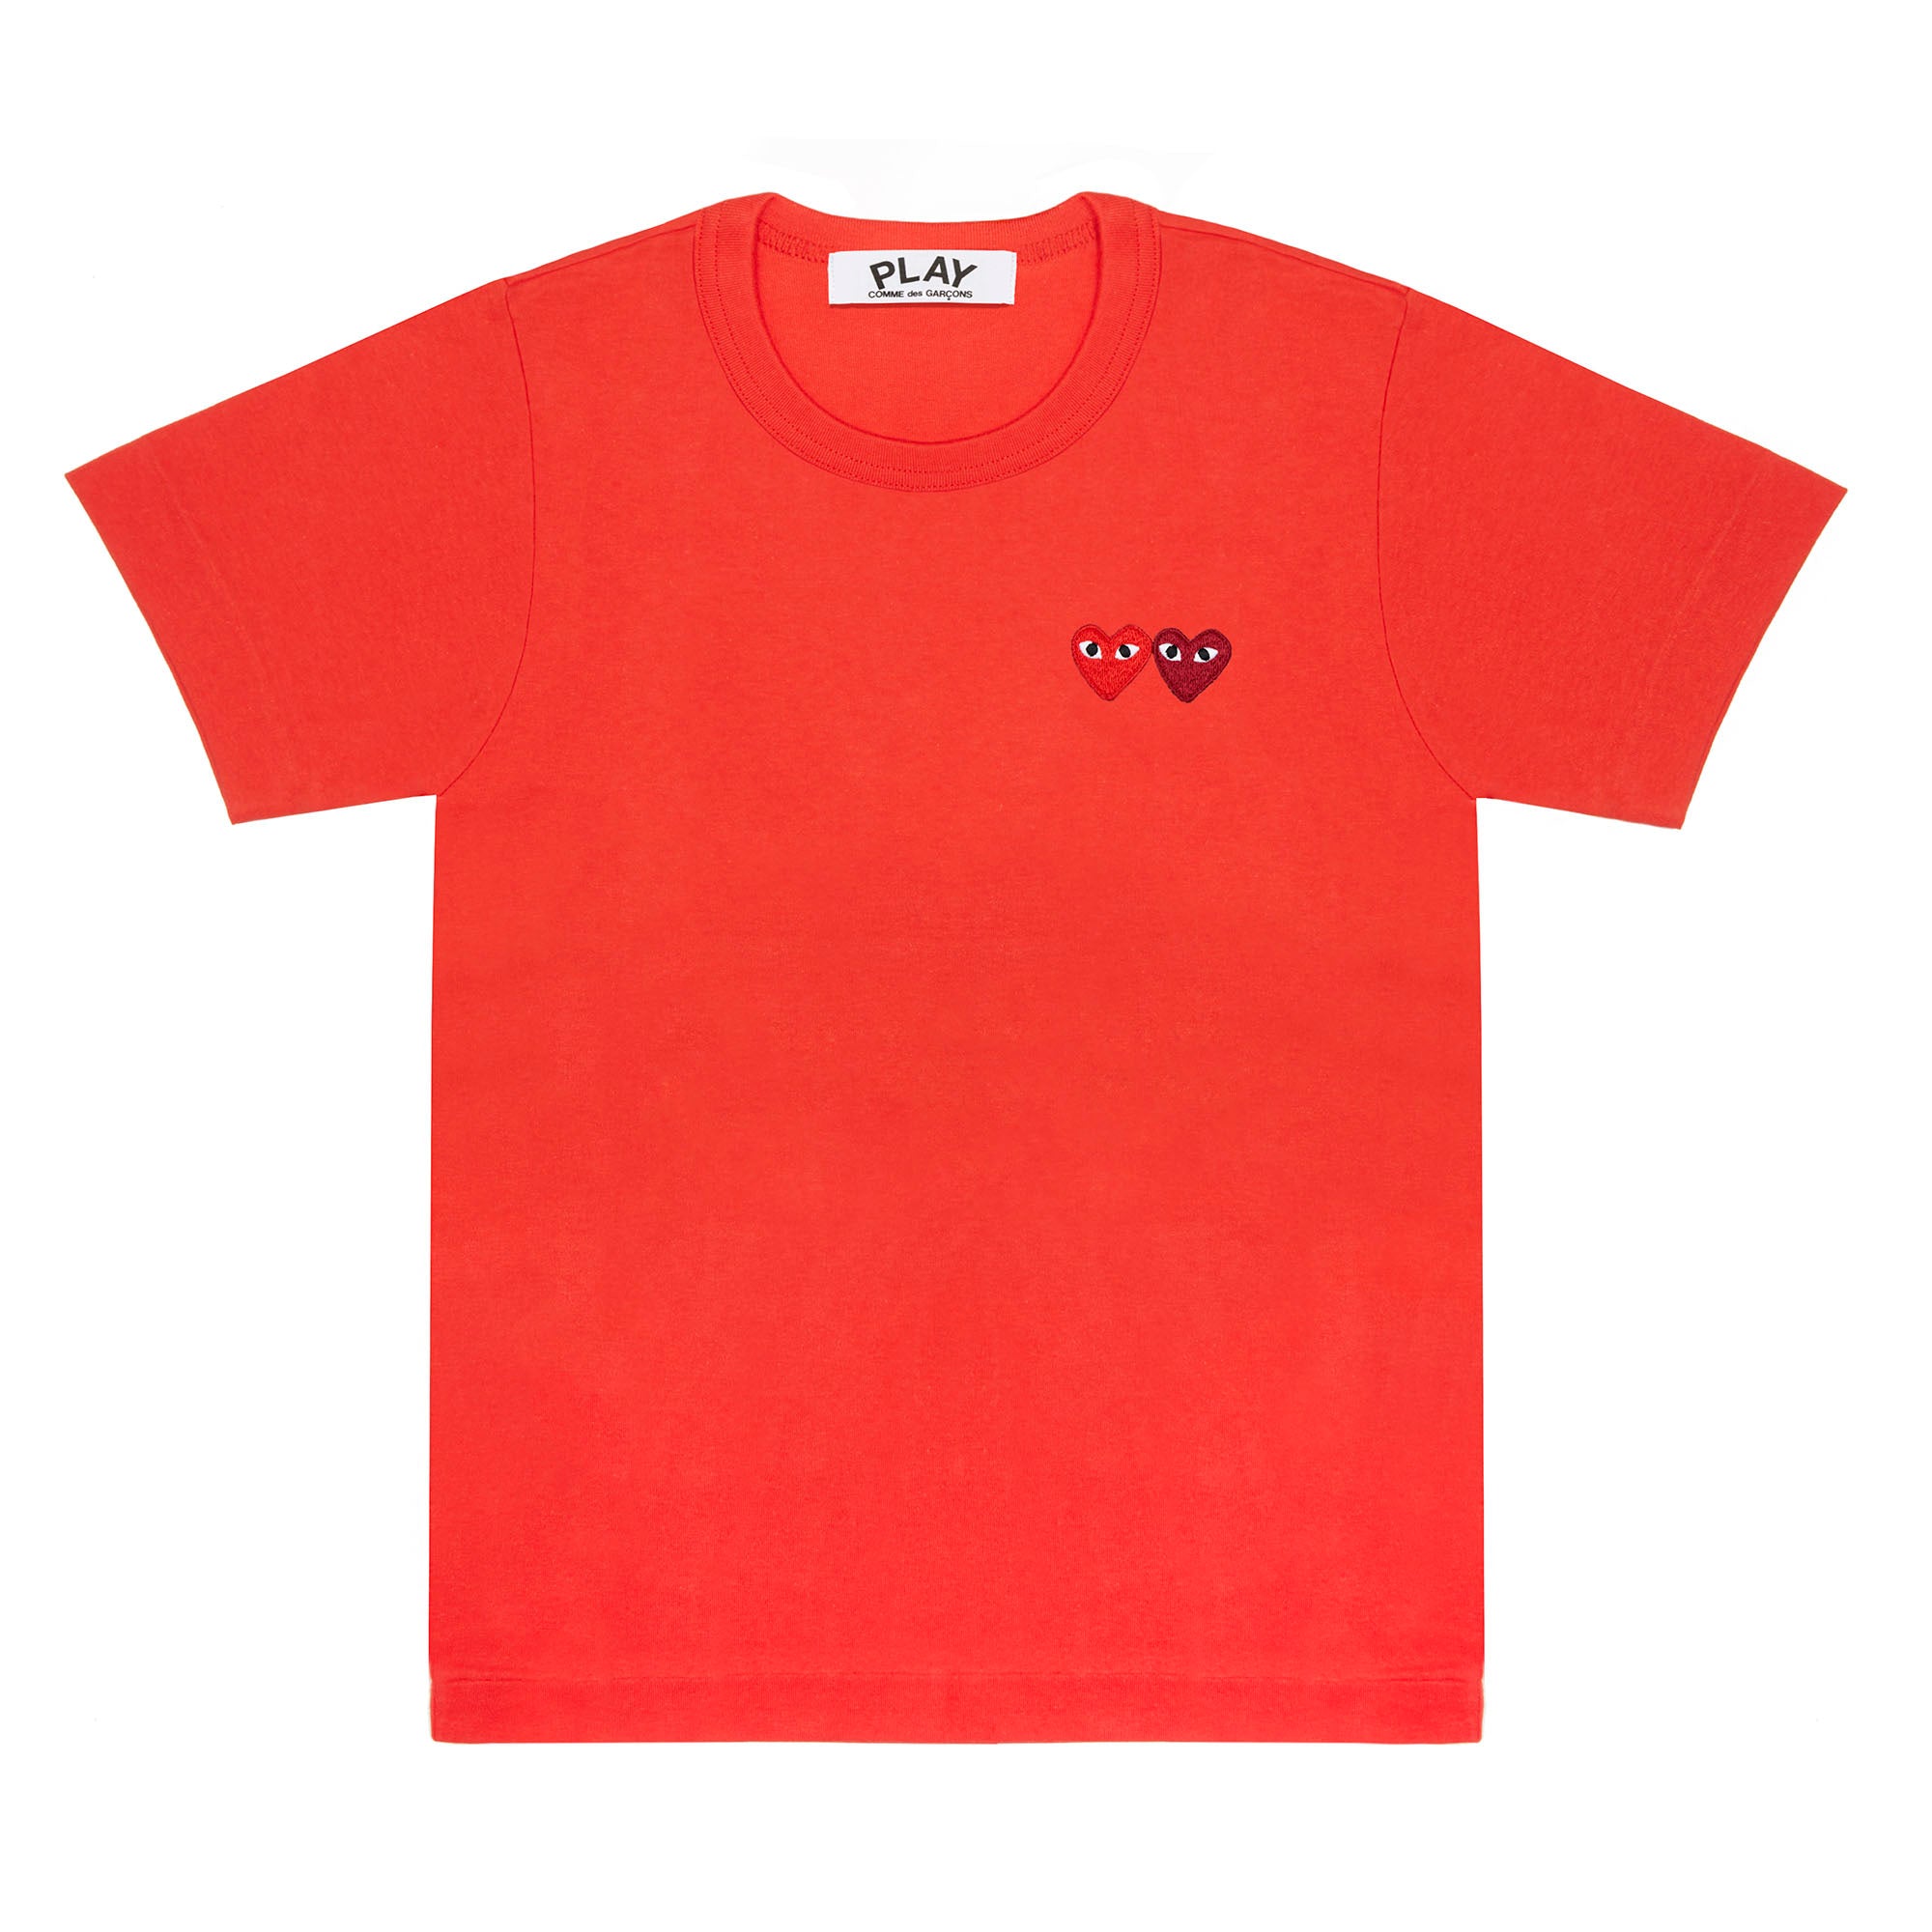 Play Comme des Garçons - T-Shirt with Double Heart - (Red) view 1